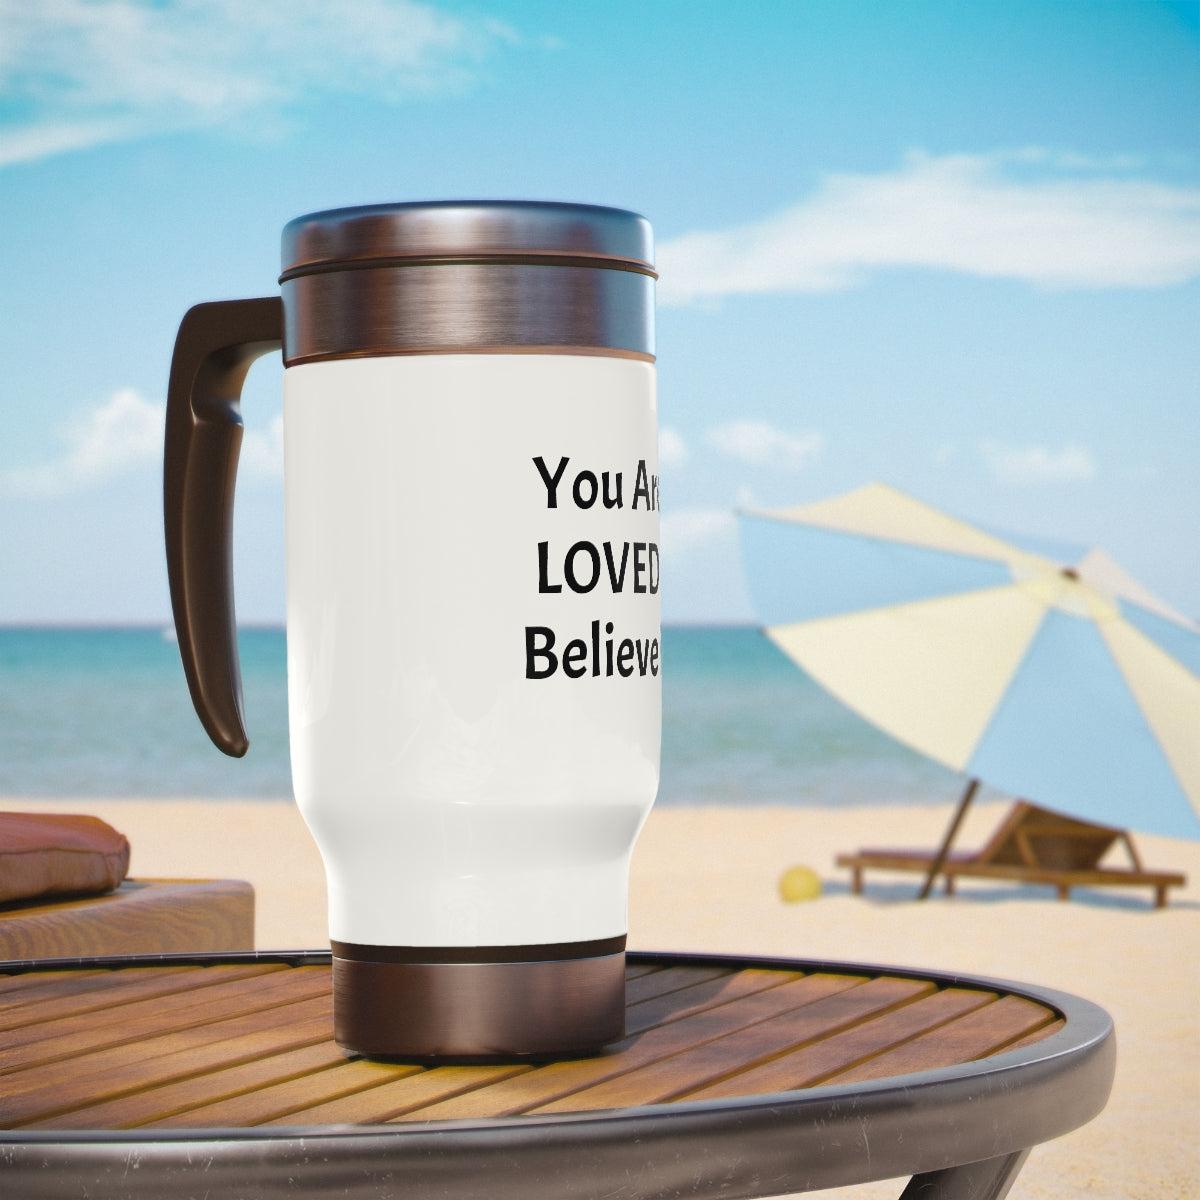 You Are Loved! Stainless Steel Travel Mug with Handle, 14oz